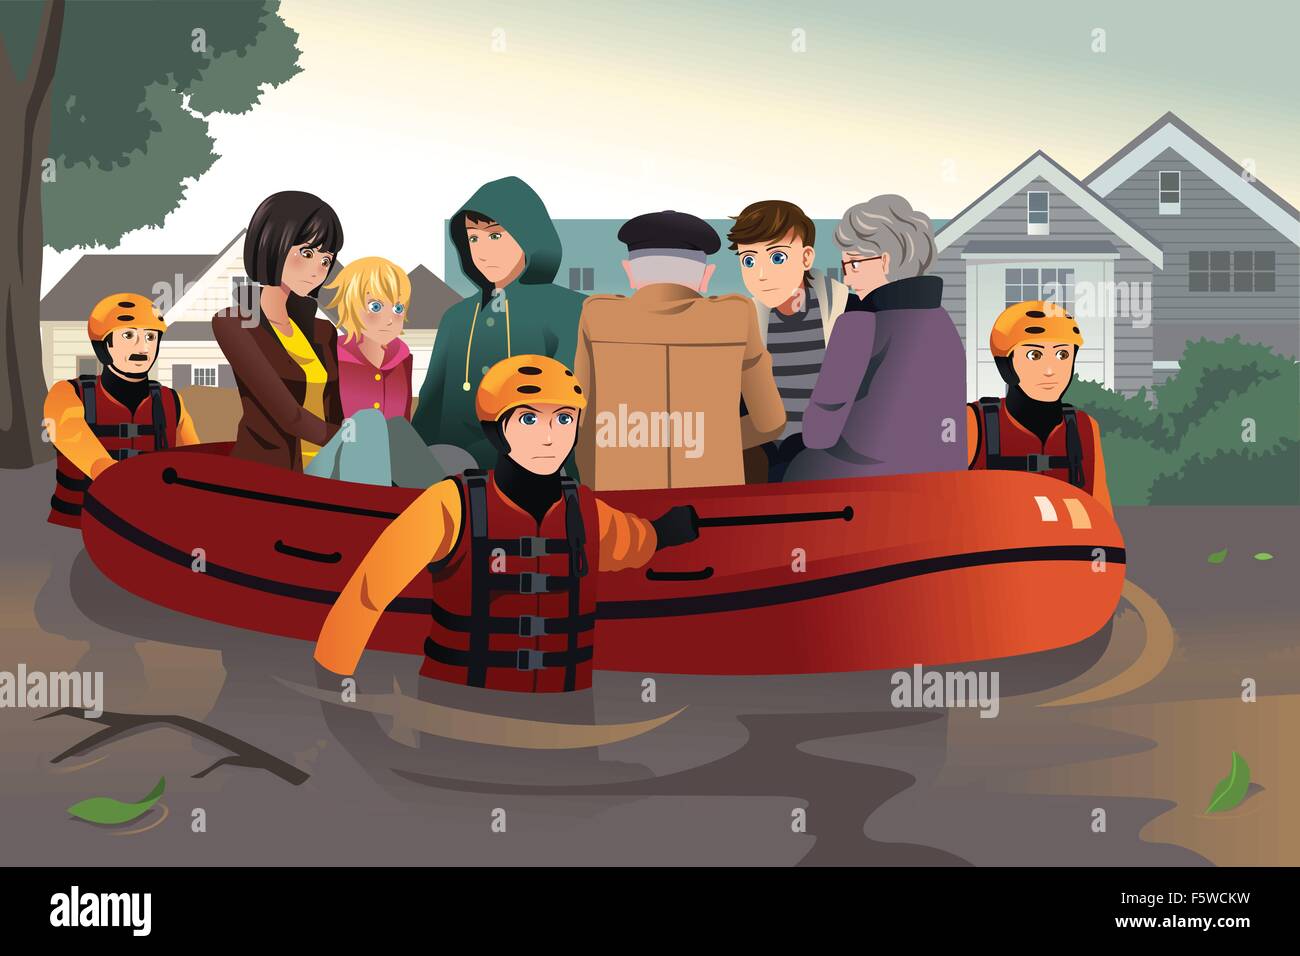 A vector illustration of rescue team helping people by pushing a boat through a flooded road Stock Vector